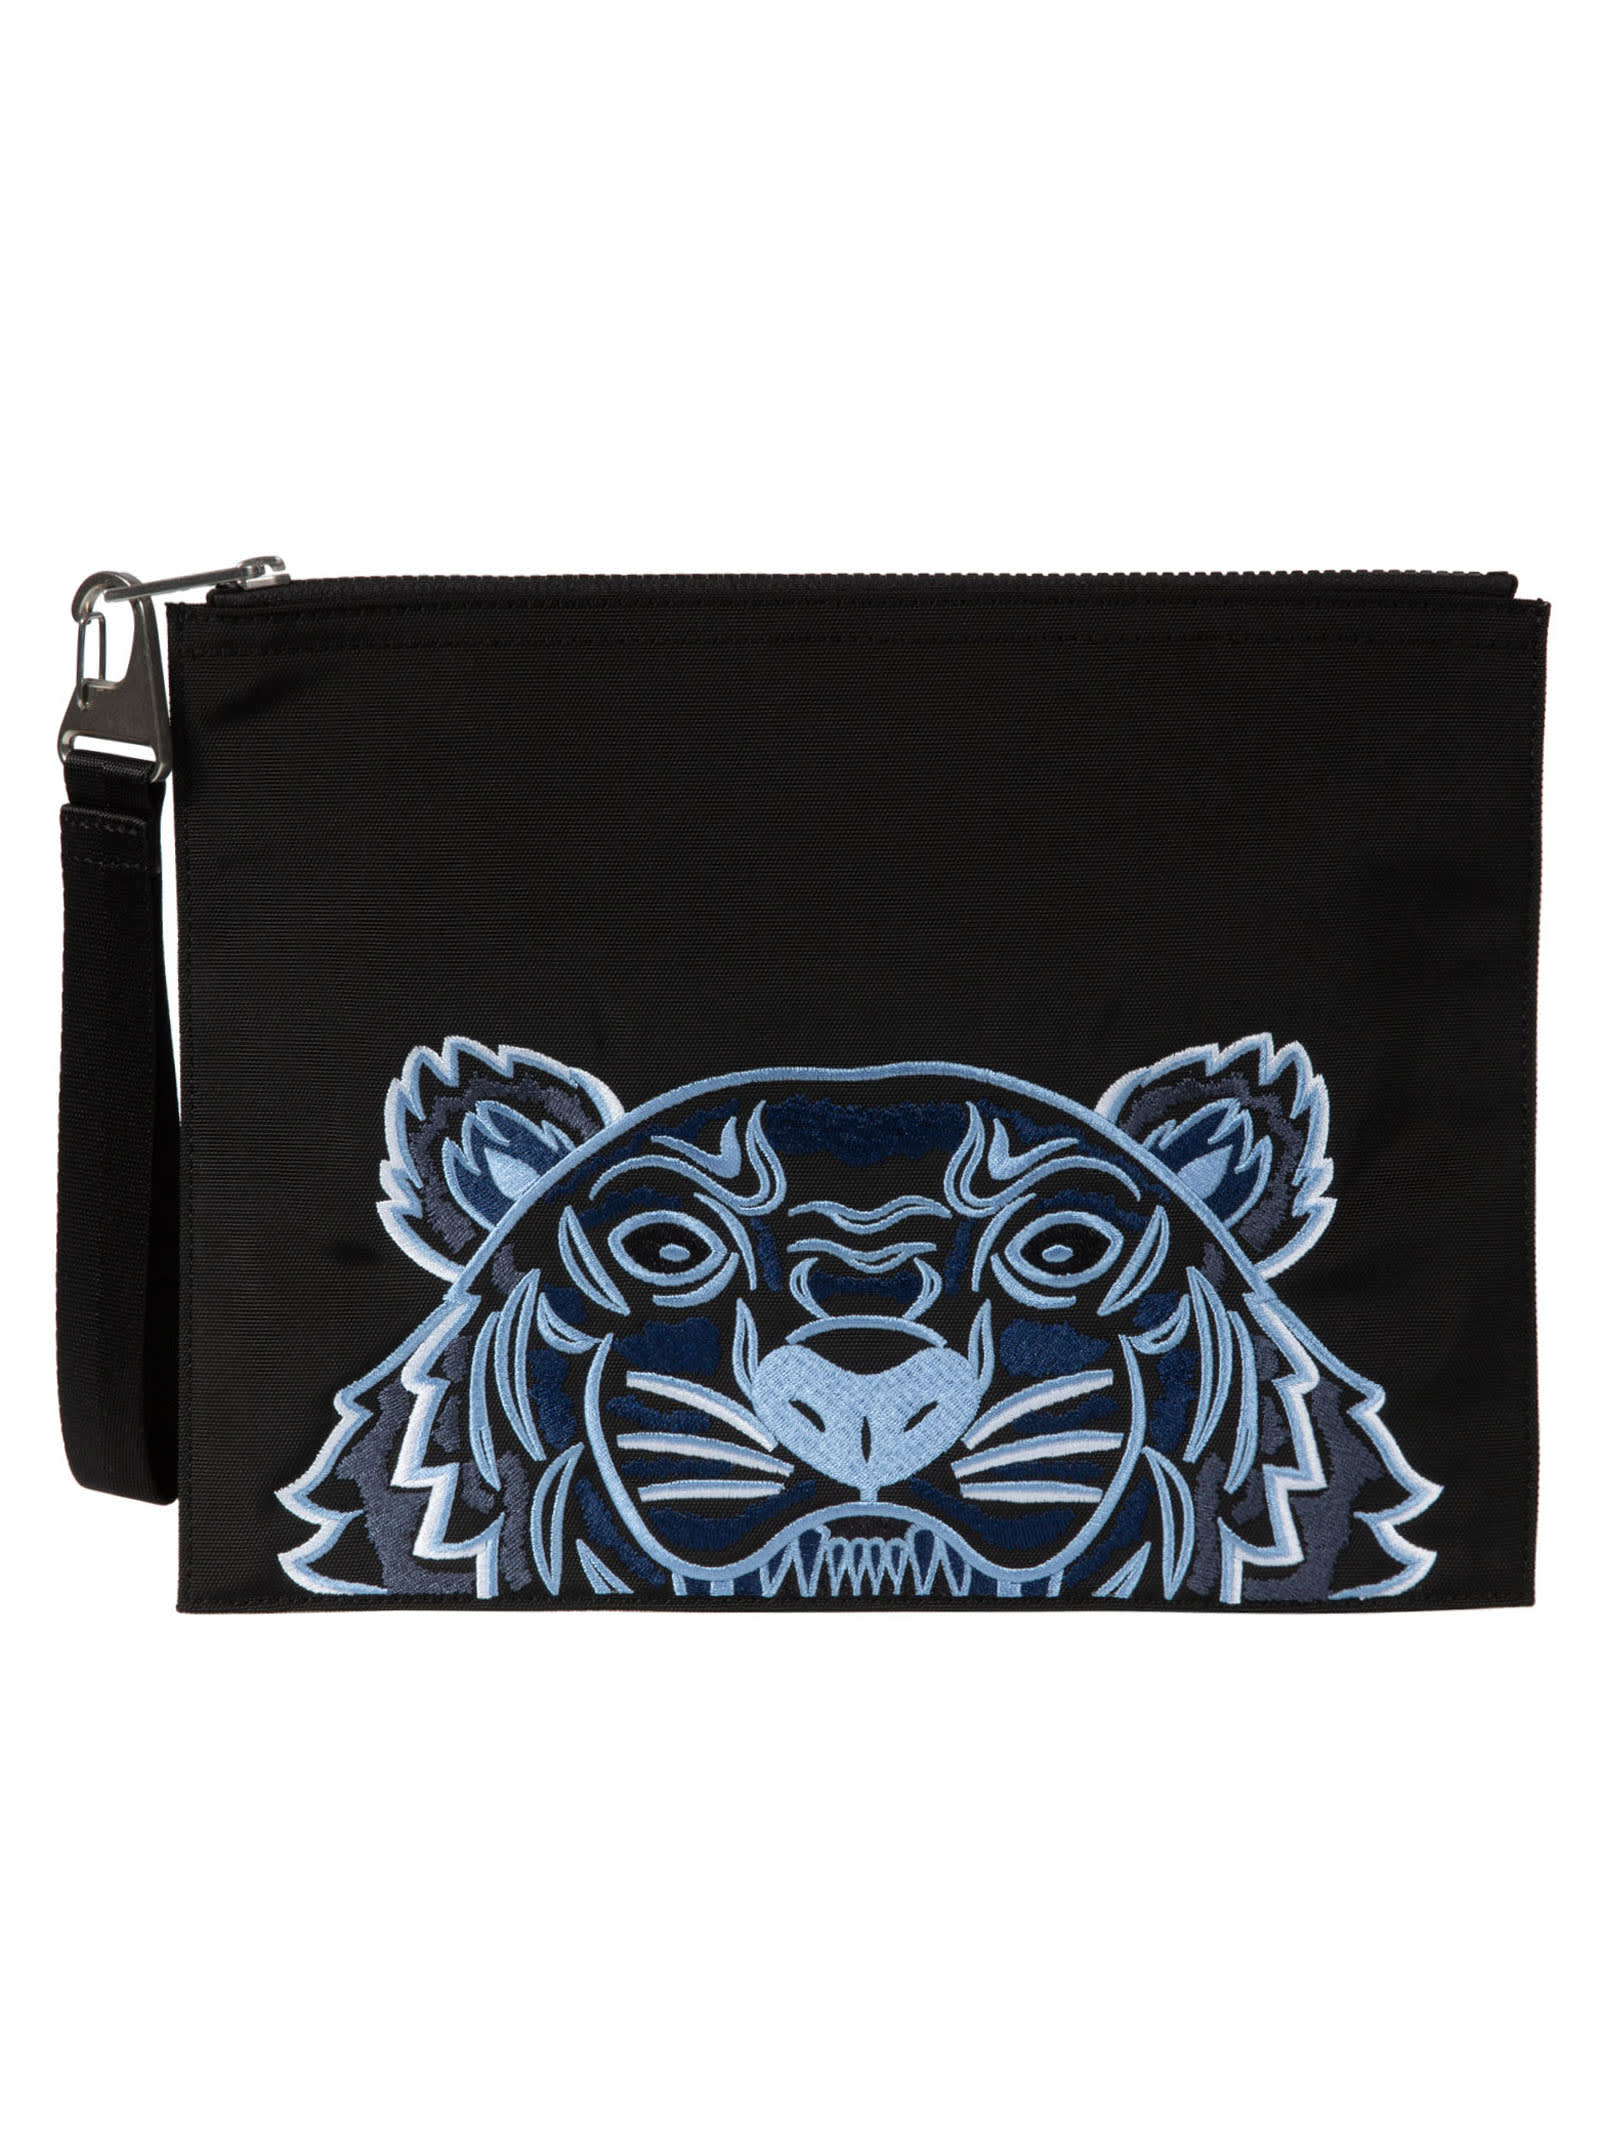 Kenzo Tiger Large Clutch